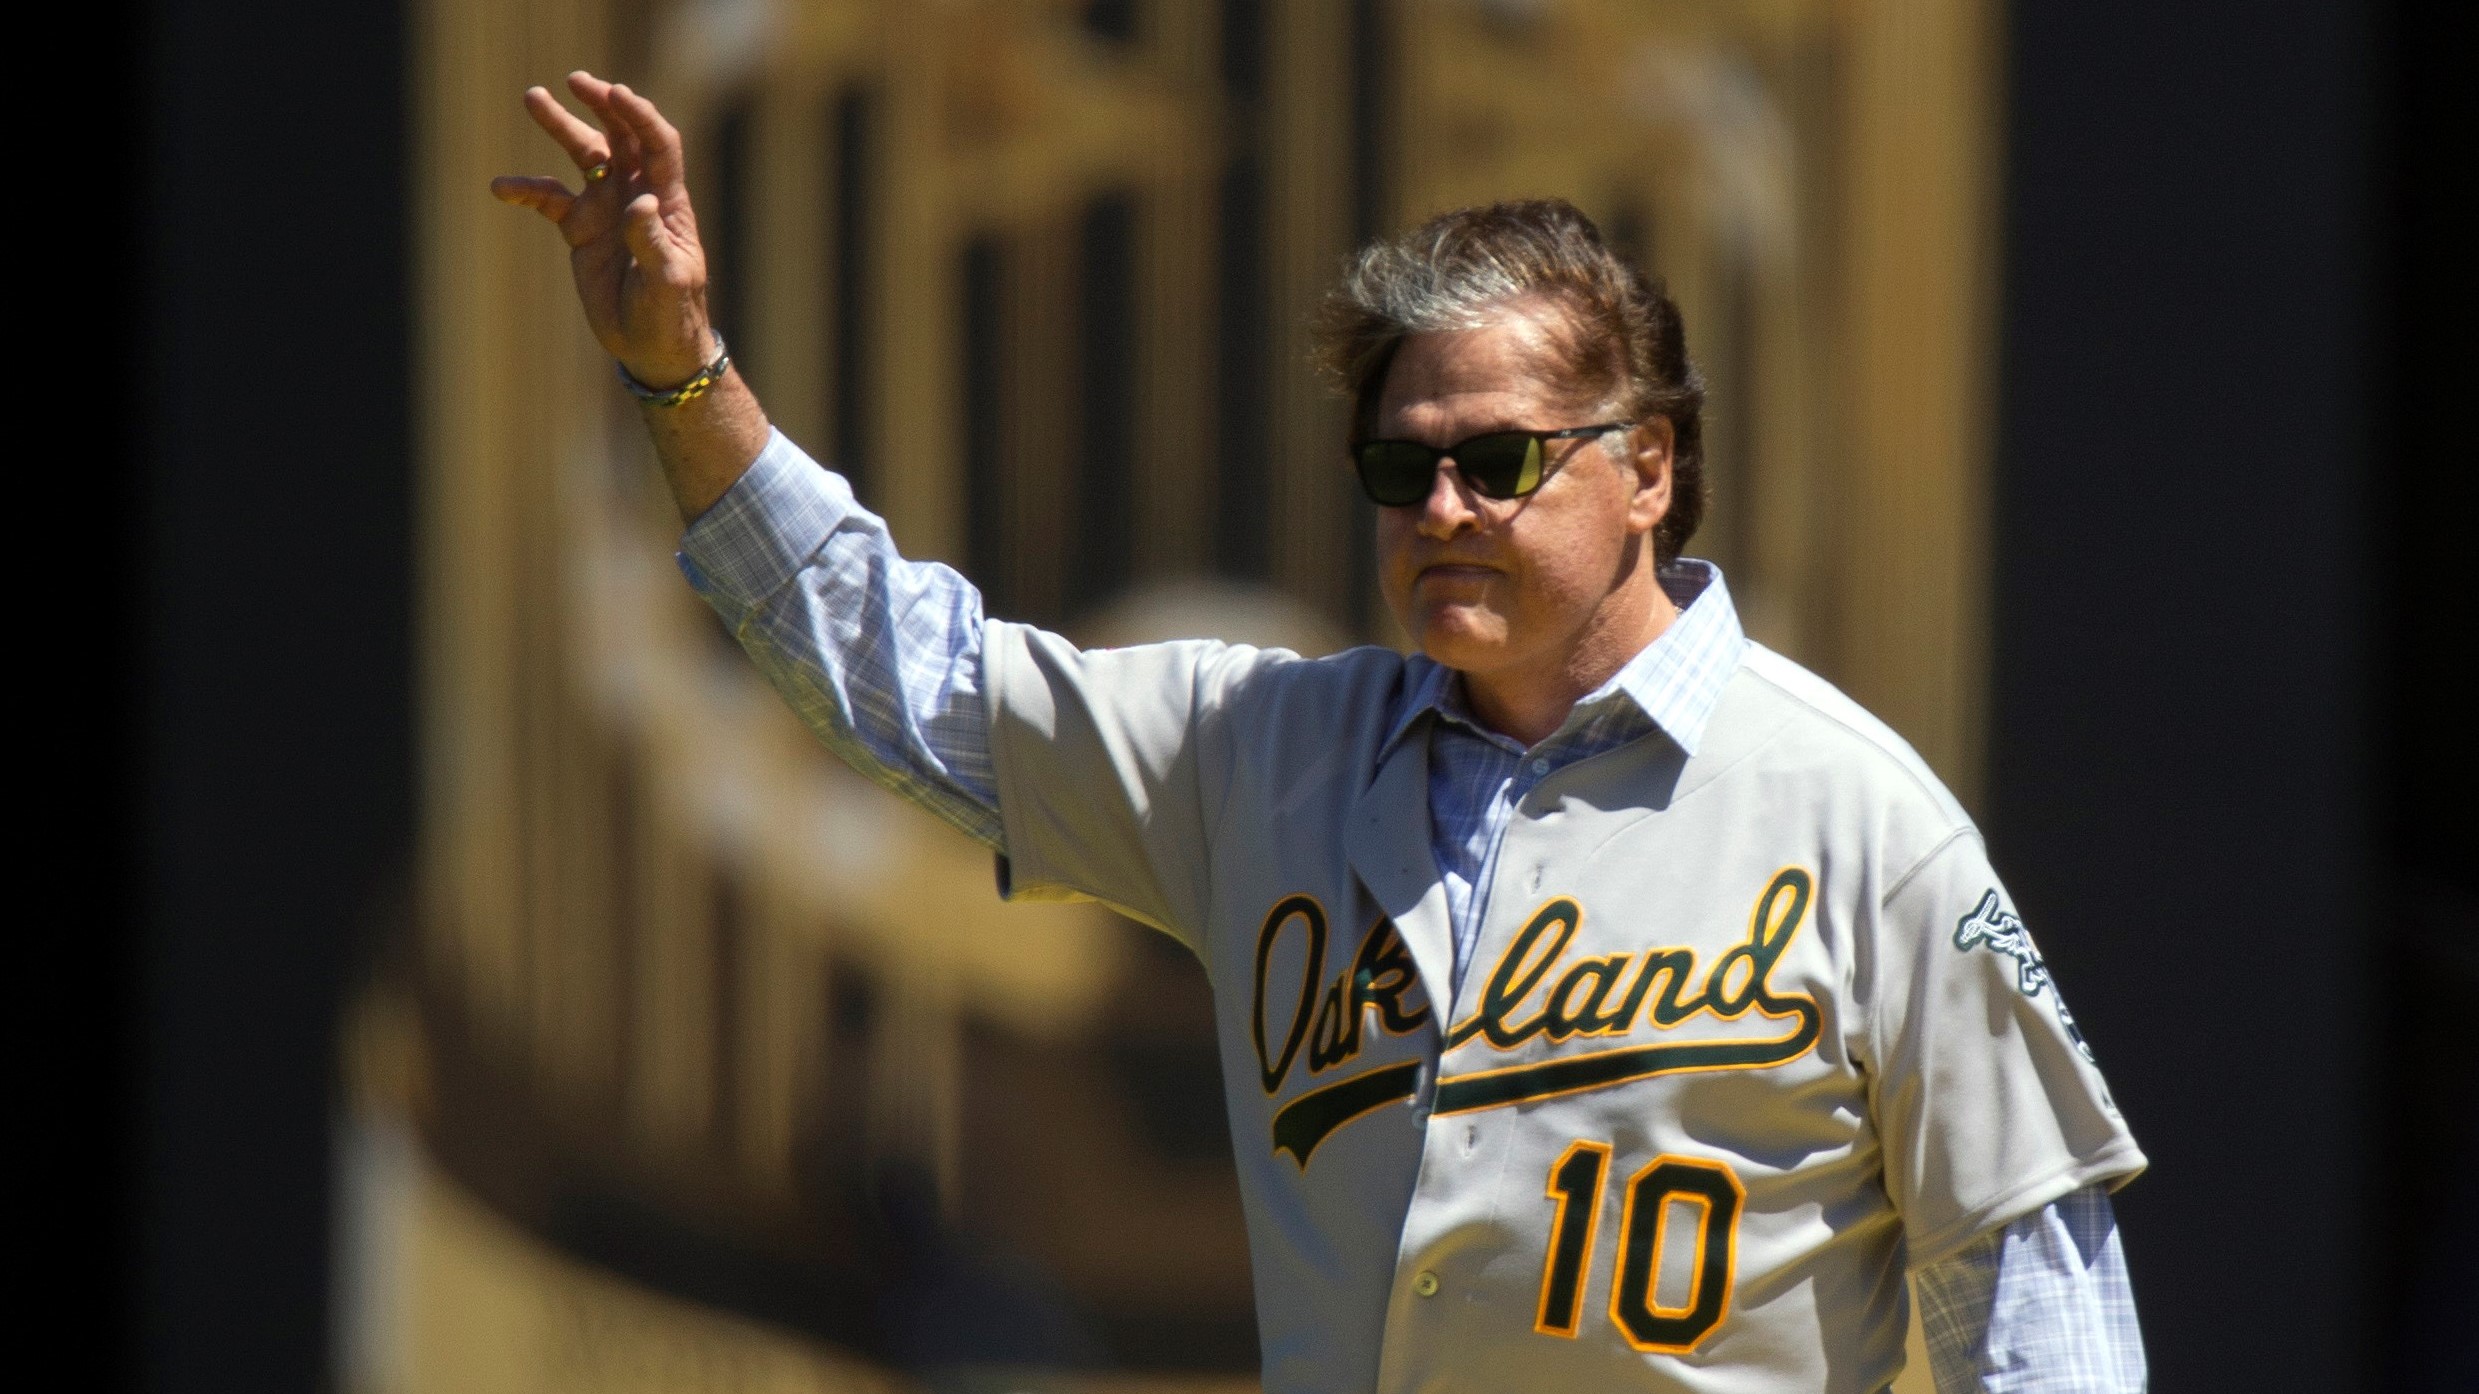 Tony La Russa's timeline from White Sox manager in 1979 to new era in 2020  – NBC Sports Chicago